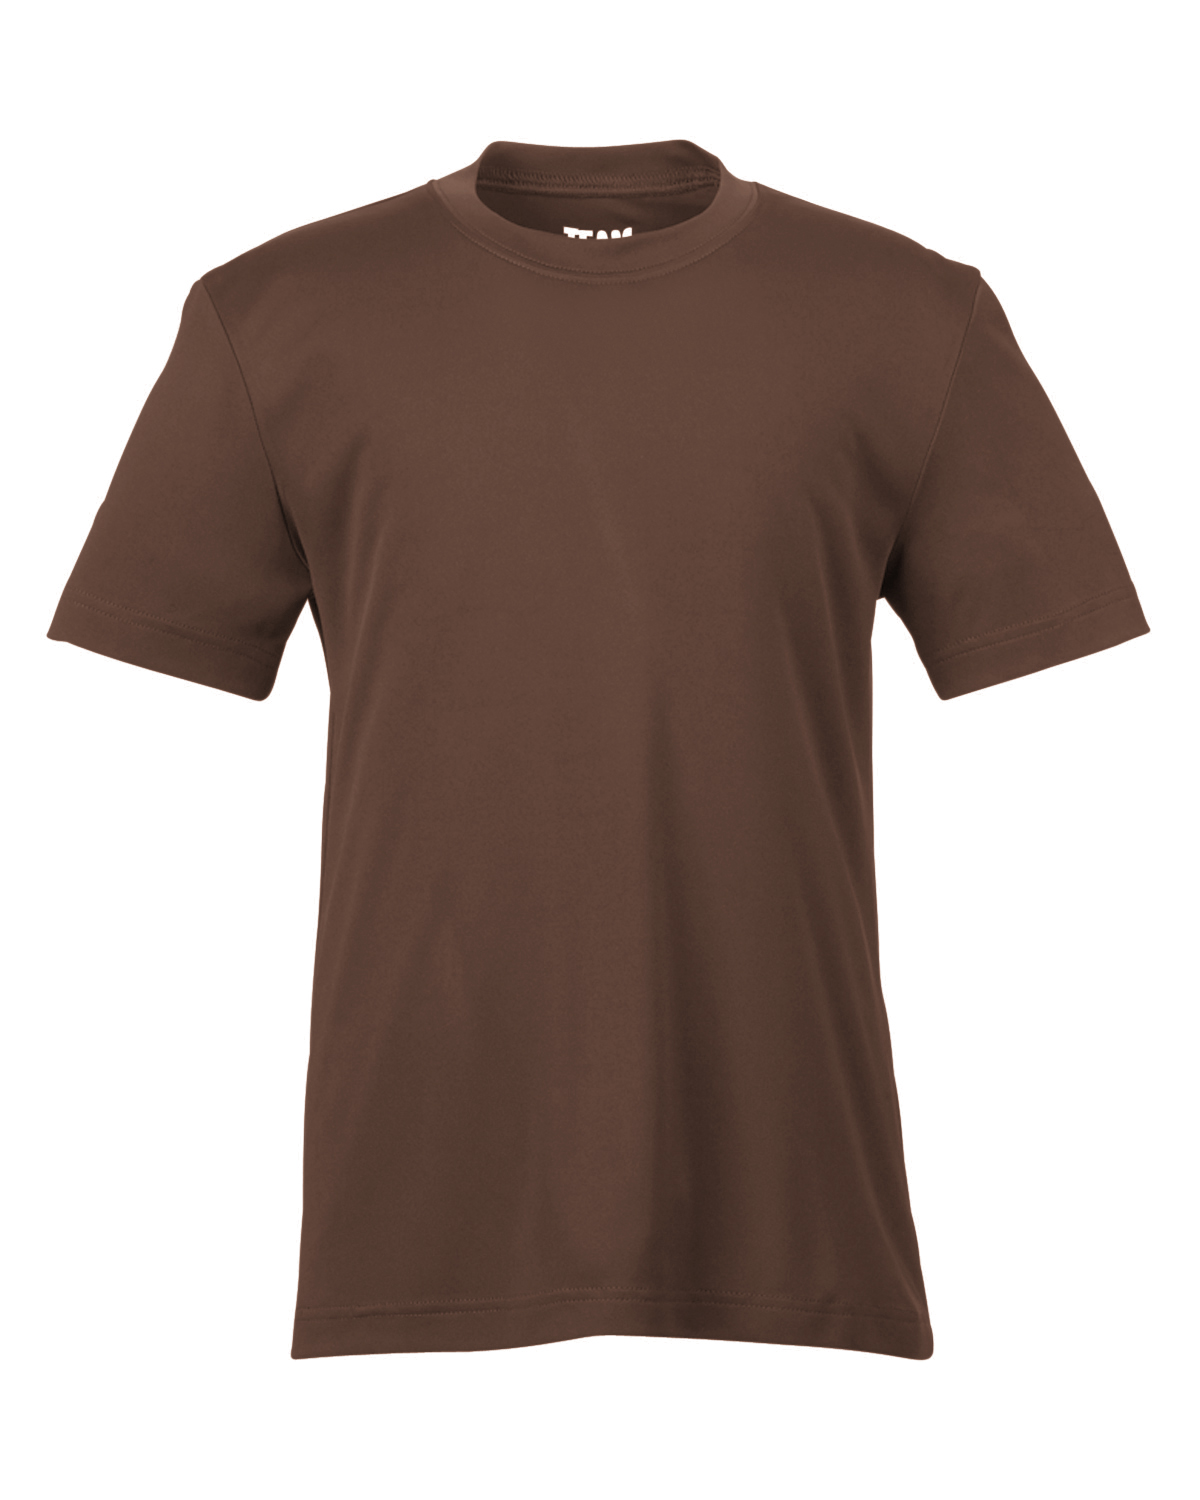 click to view SPORT DARK BROWN